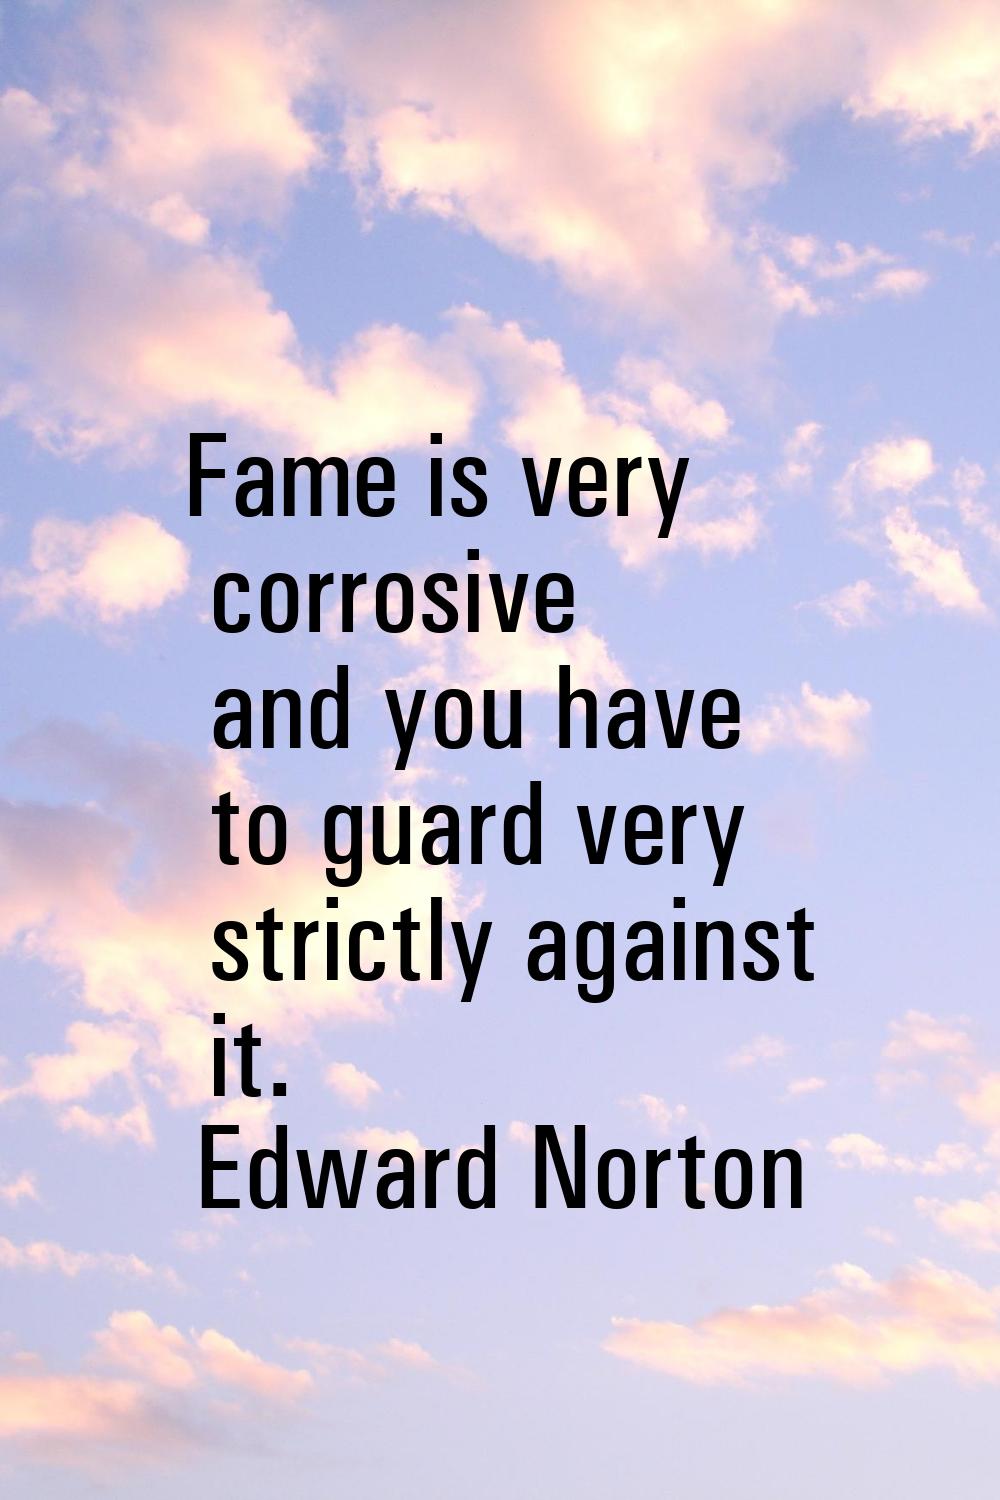 Fame is very corrosive and you have to guard very strictly against it.